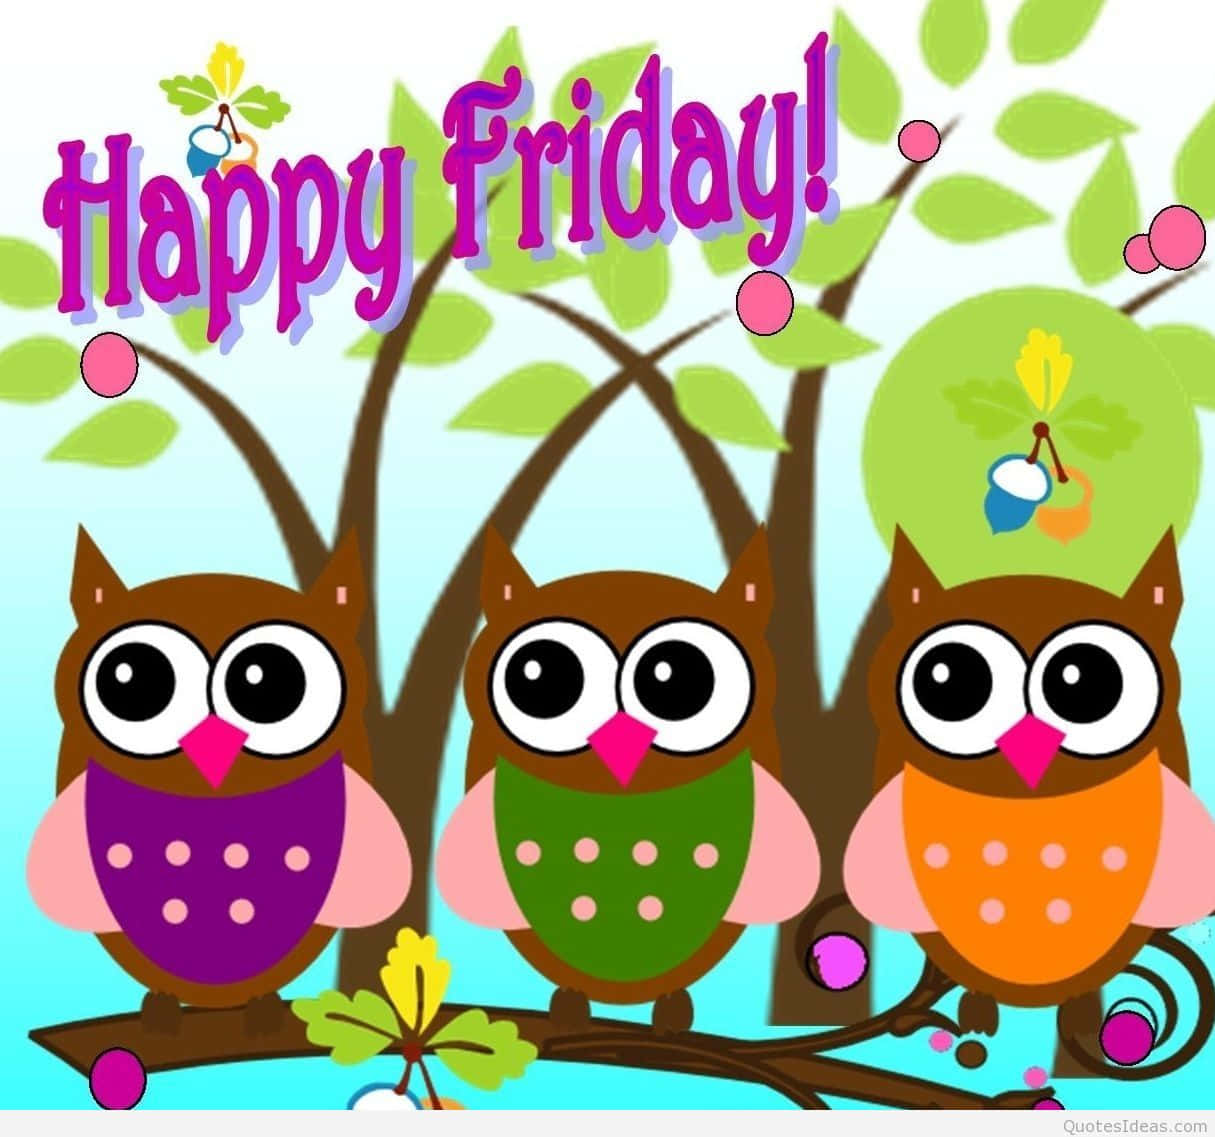 Happy Friday Owls With A Branch And The Words Happy Friday Background